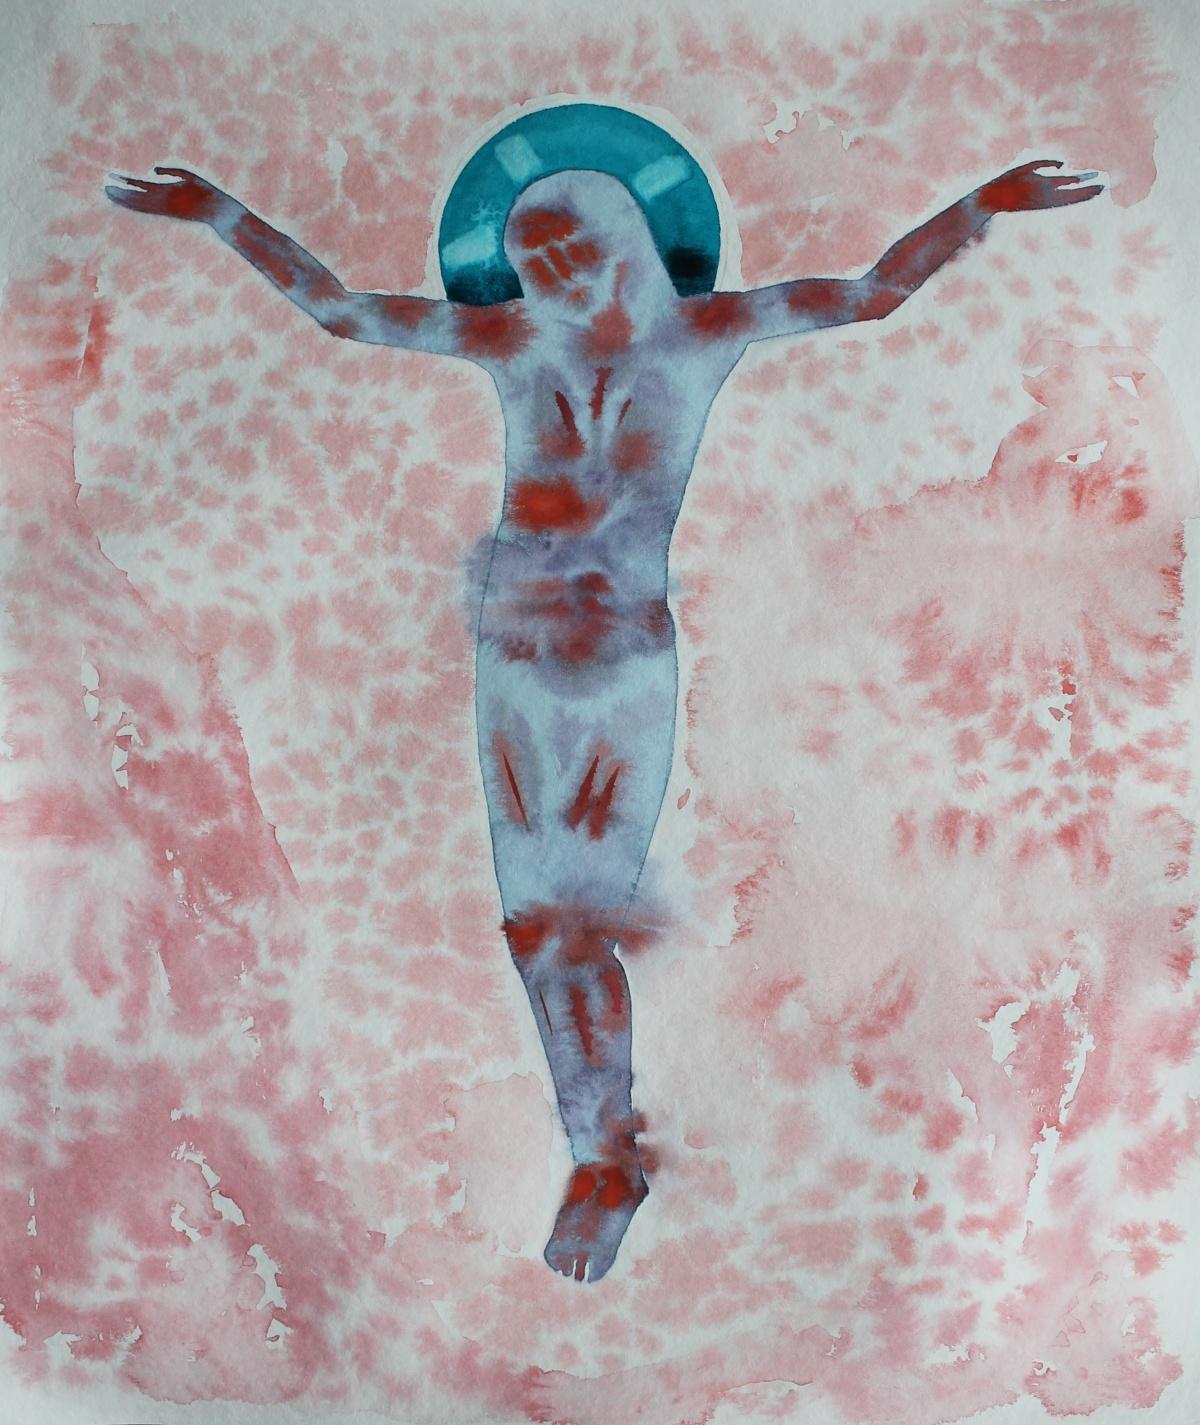 Danylo Movchan Figurative Art - Crucifix - Contemporary watercolor painting on paper, War diaries series